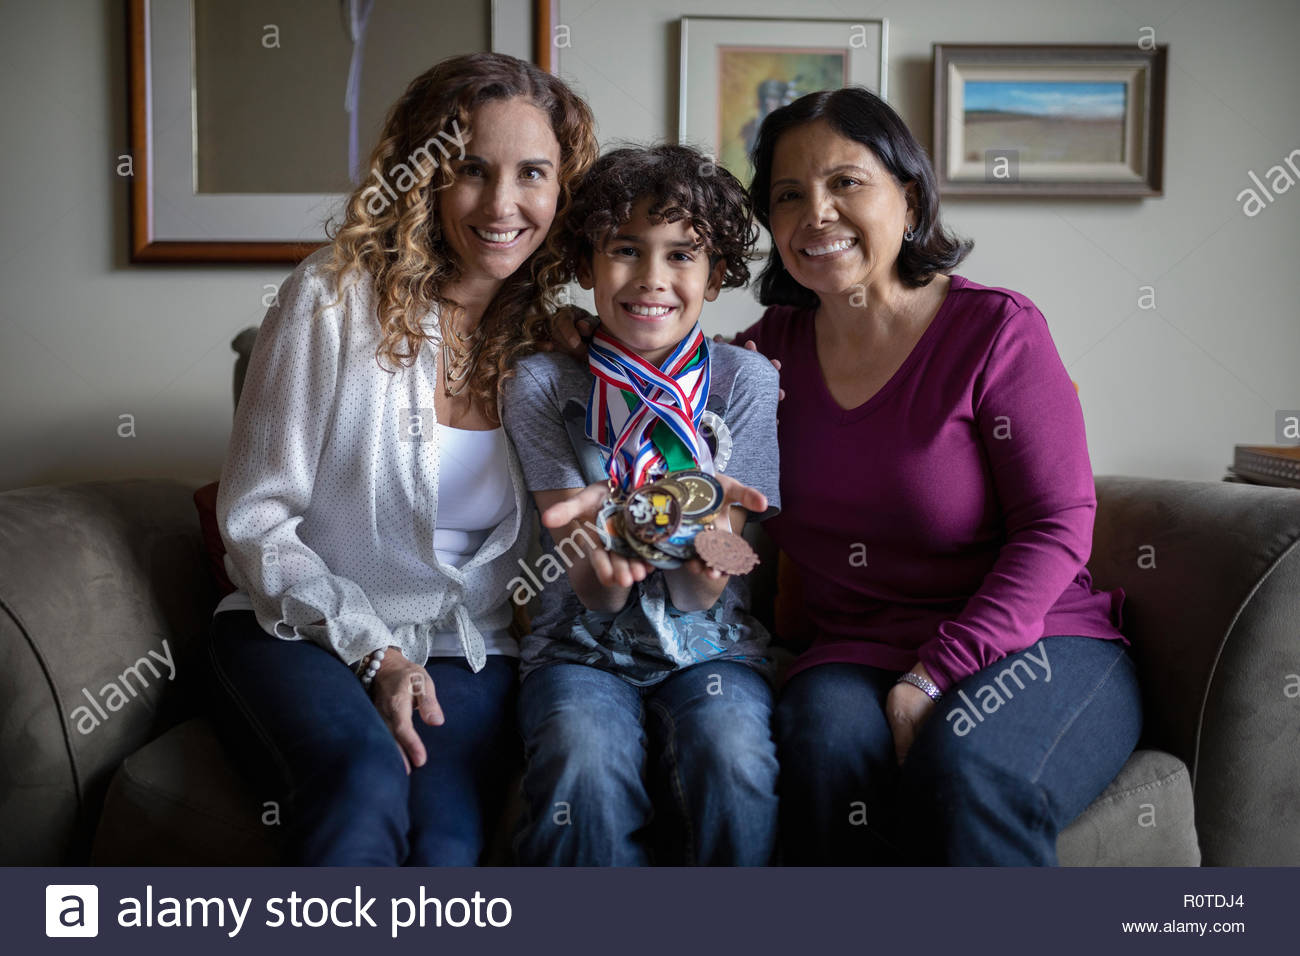 Portrait confident Latinx boy with sports medals sitting with mother and grandmother Stock Photo